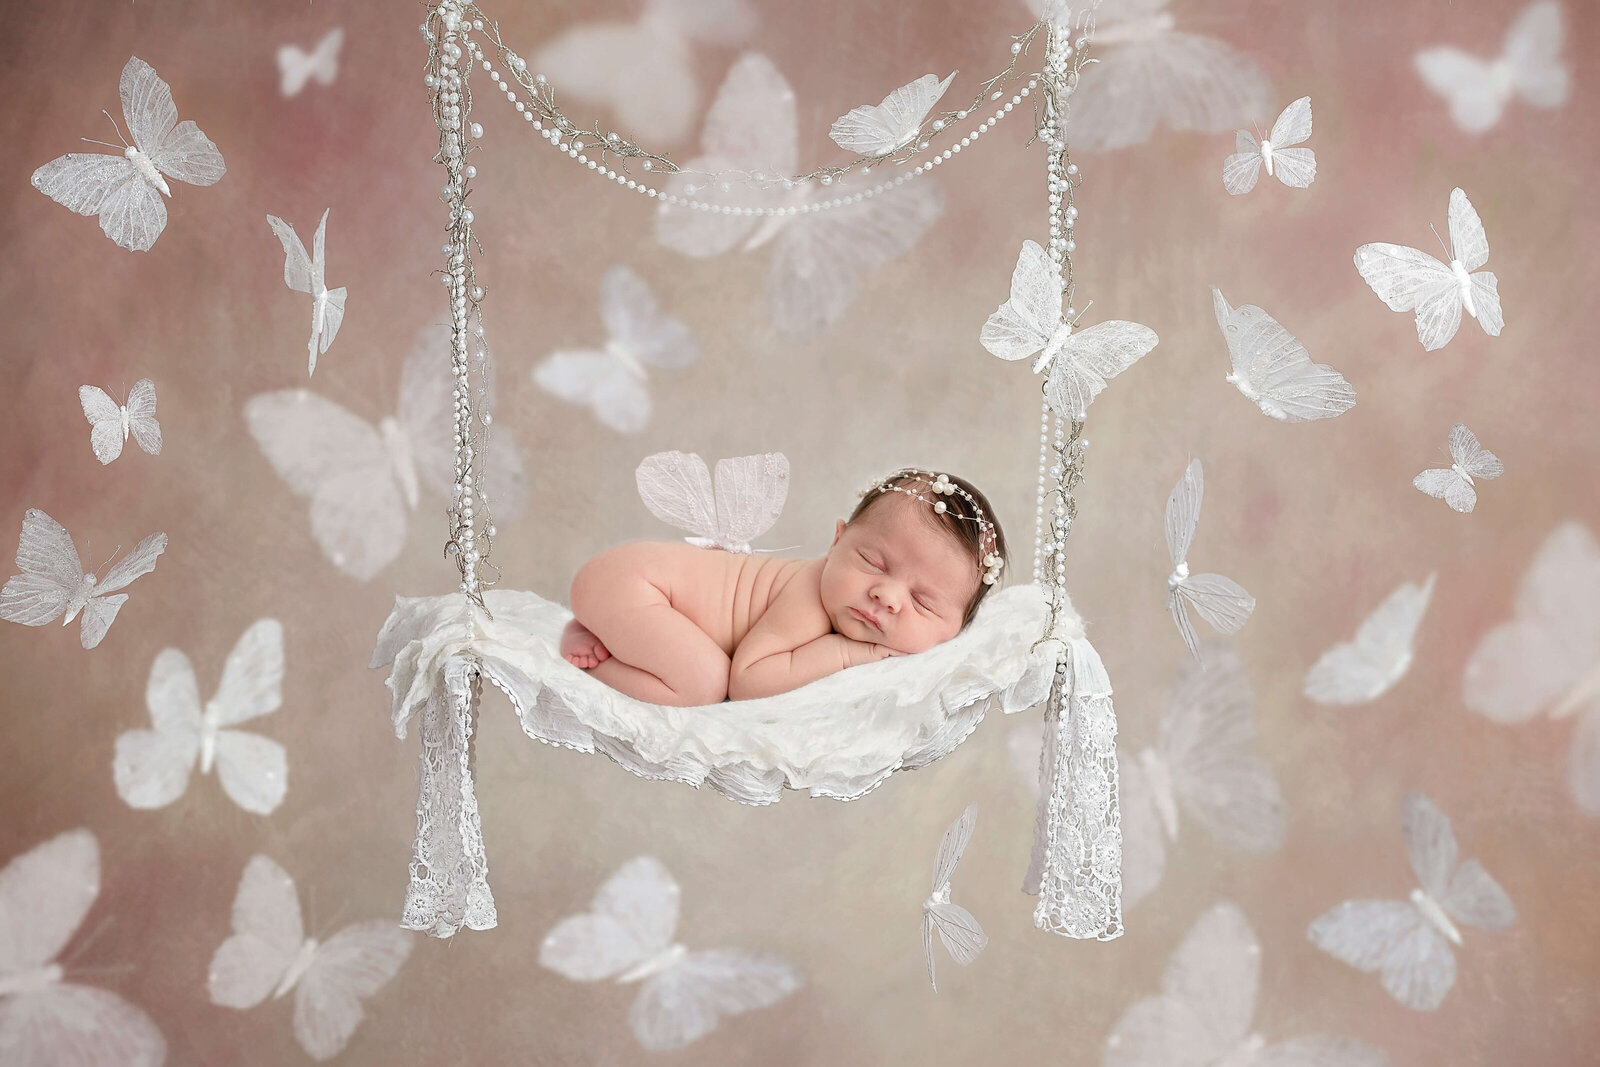 Newborn baby sleeping on a swing surrounded by white butterflies wearing a pearl headband